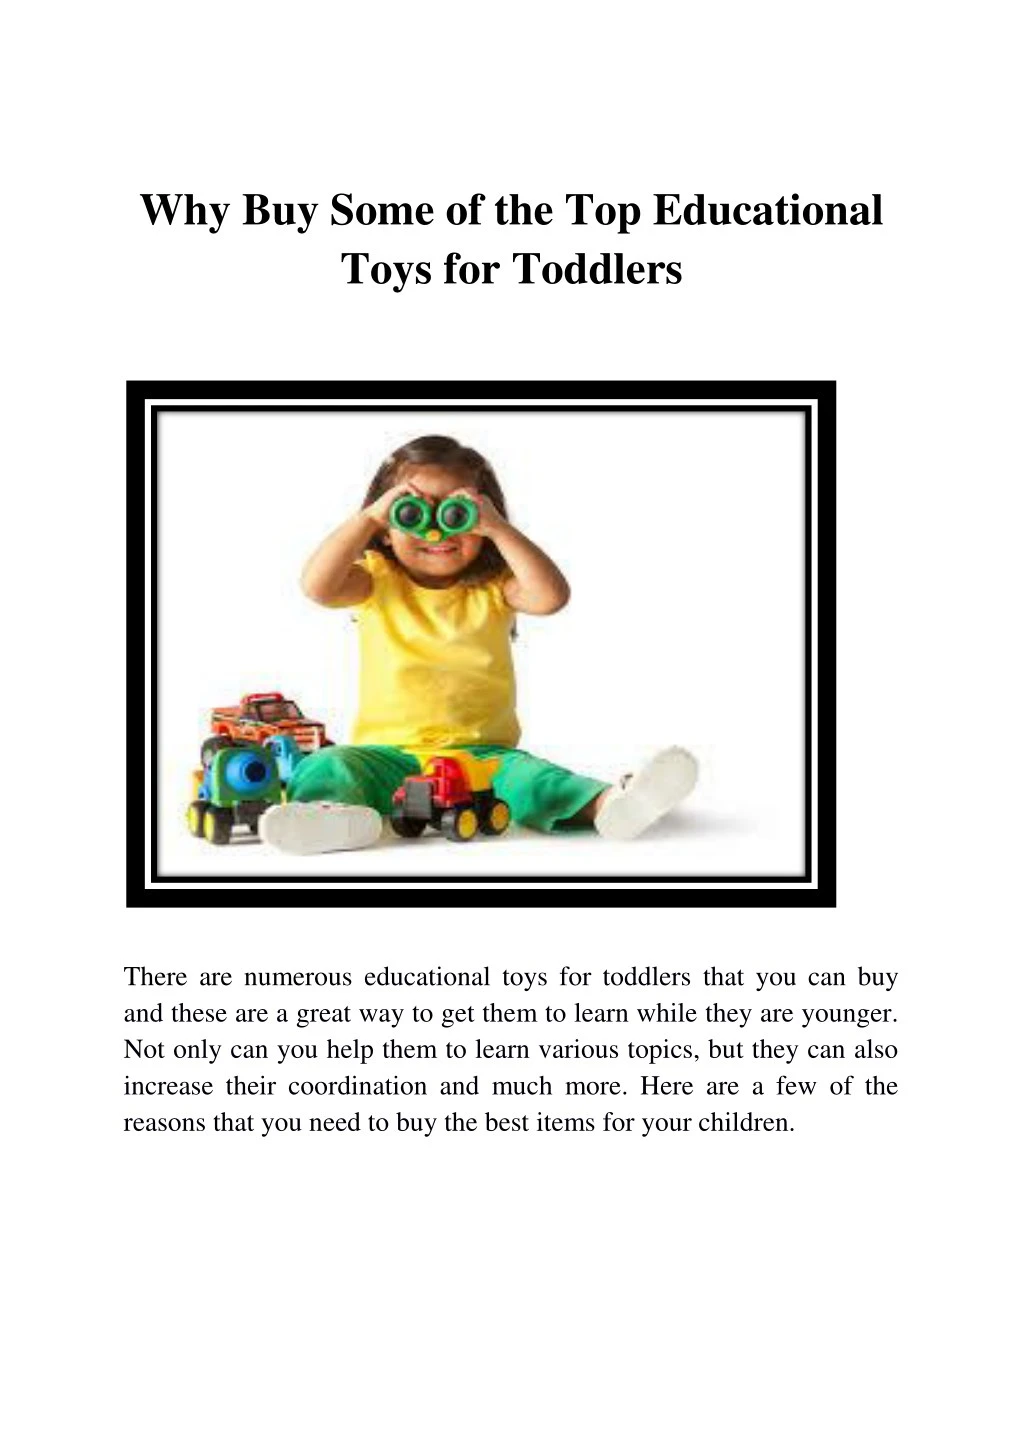 why buy some of the top educational toys